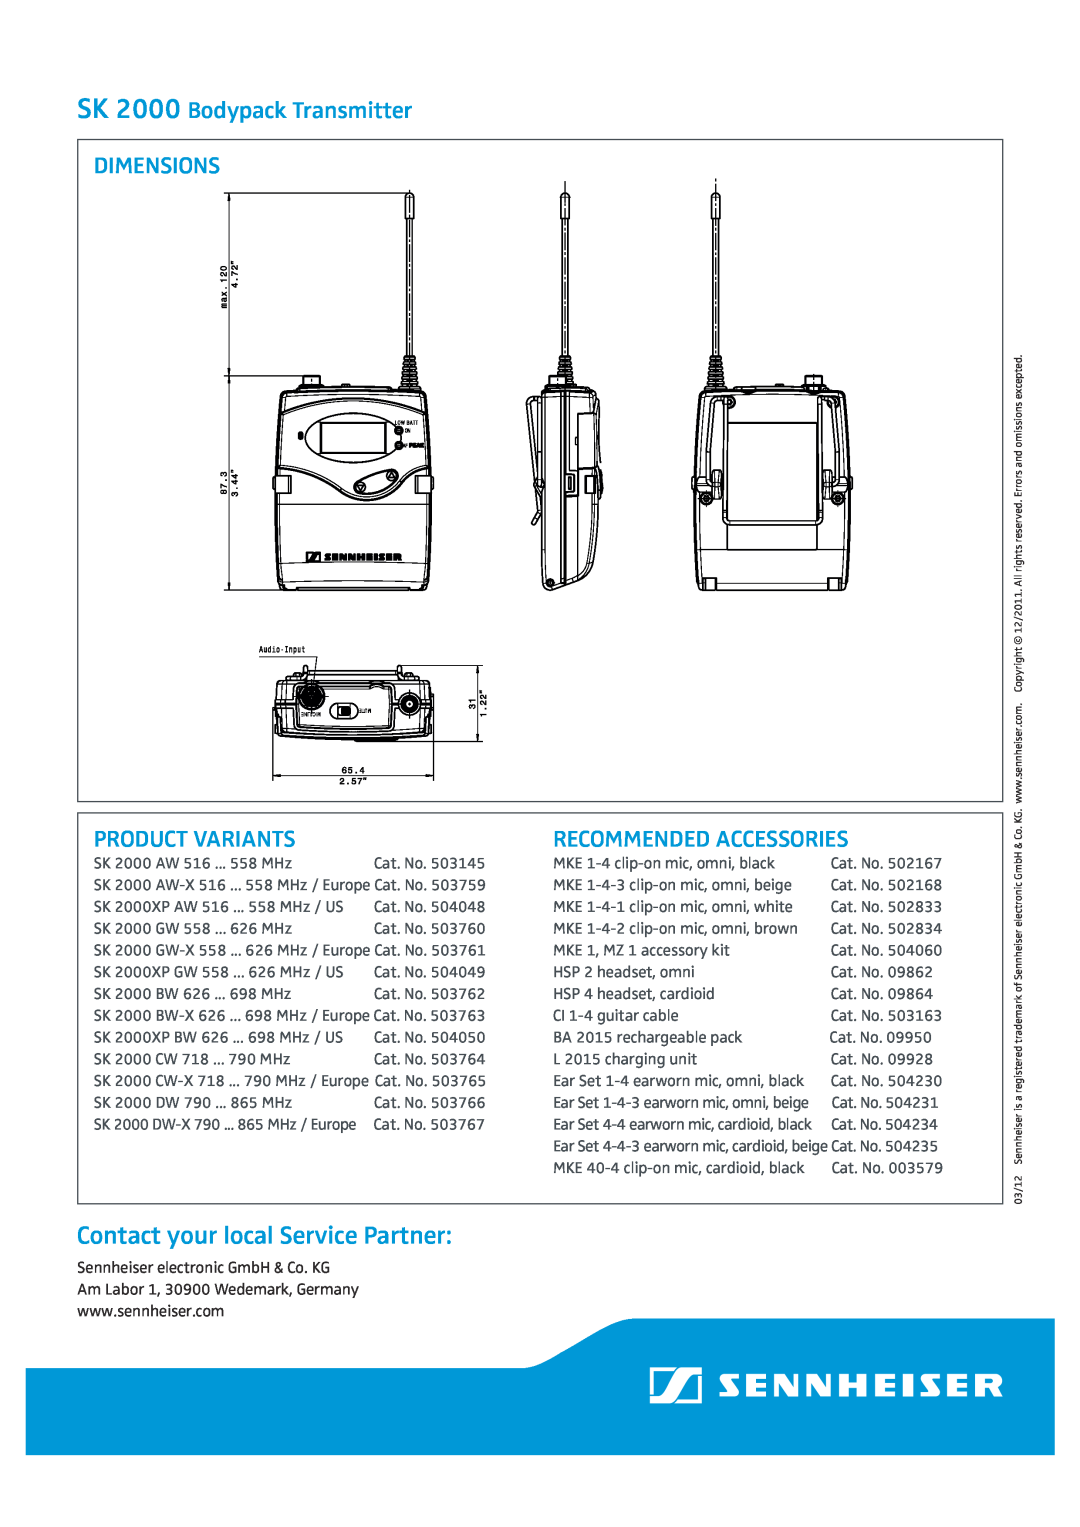 Sennheiser specifications SK 2000 Bodypack Transmitter DIMENSIONS, Product Variants, Recommended Accessories 